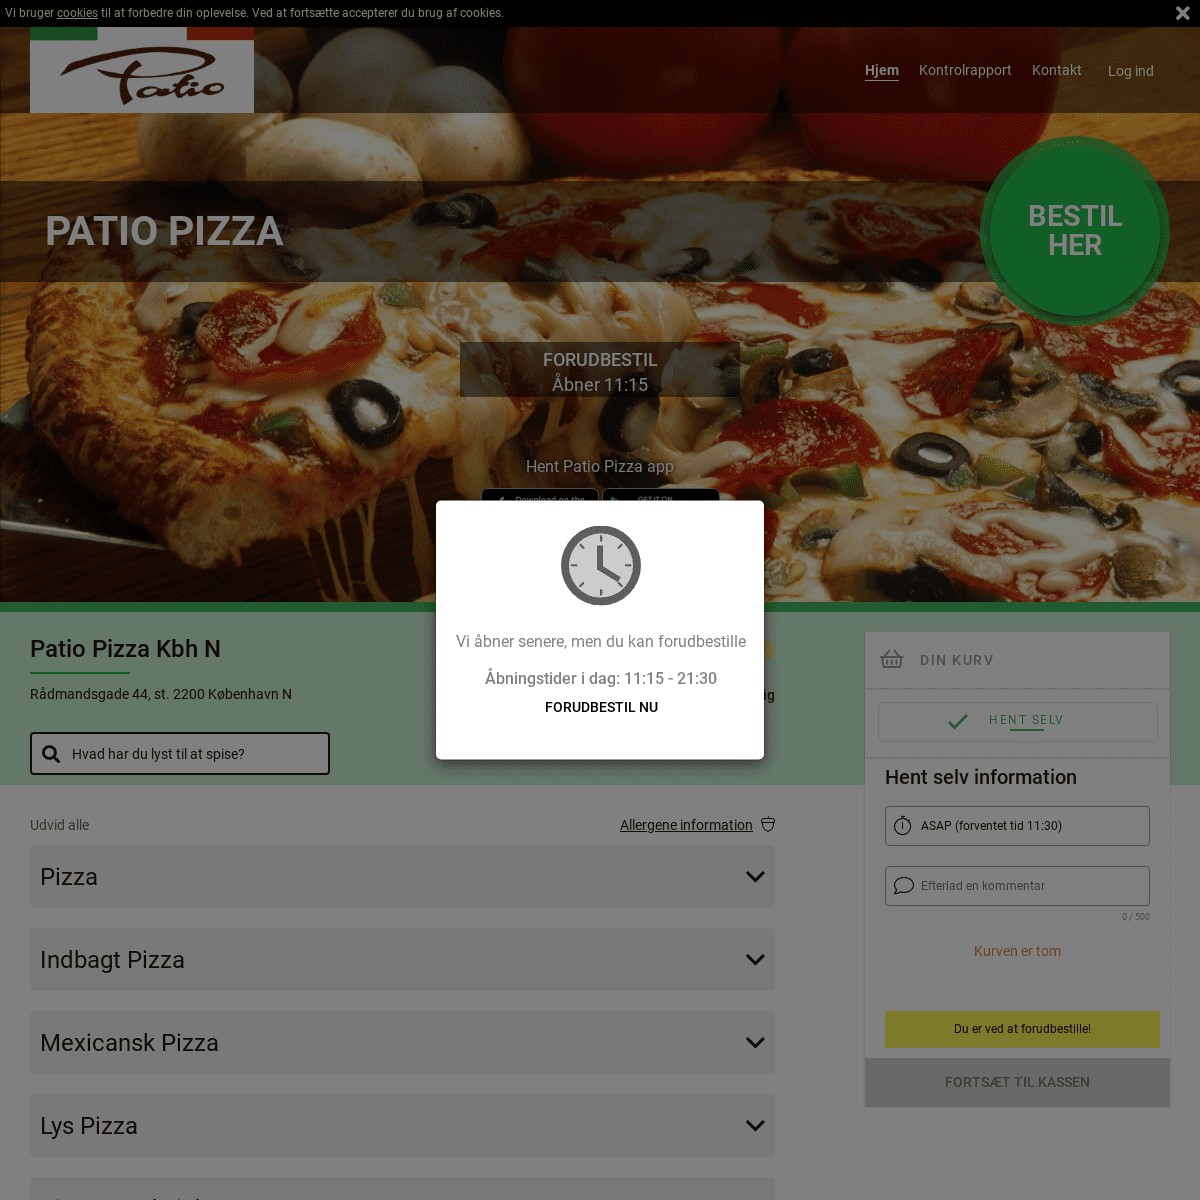 A complete backup of pizzapatio.dk